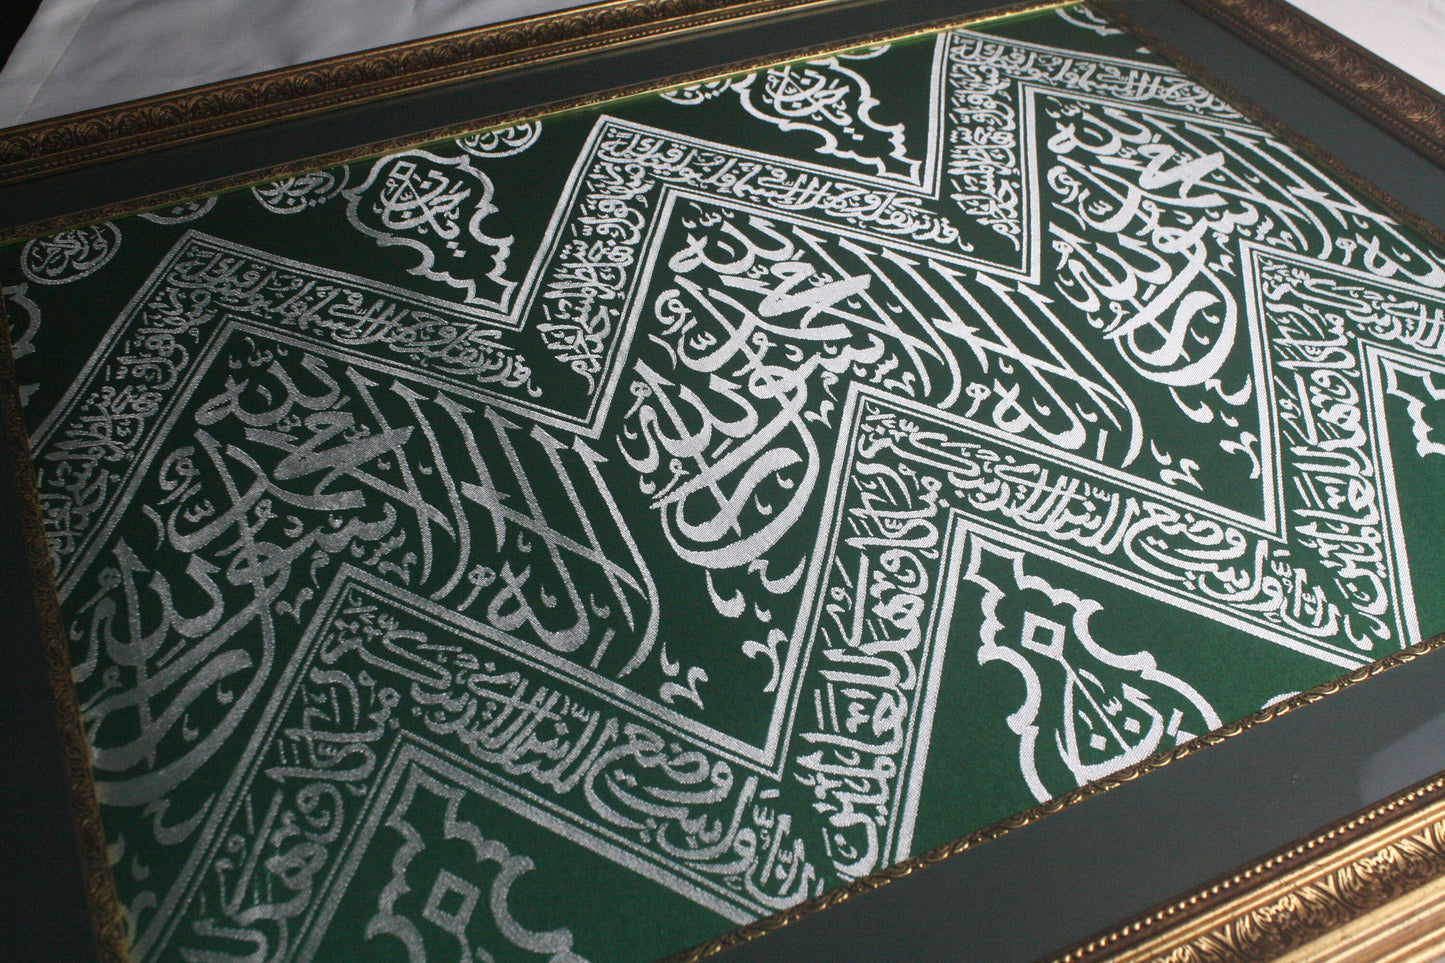 Holy Kaaba Inside Green Cover Cloth With Certificate / Housewarming Islam Home Living Room Decor / Precious Gift for Muslim